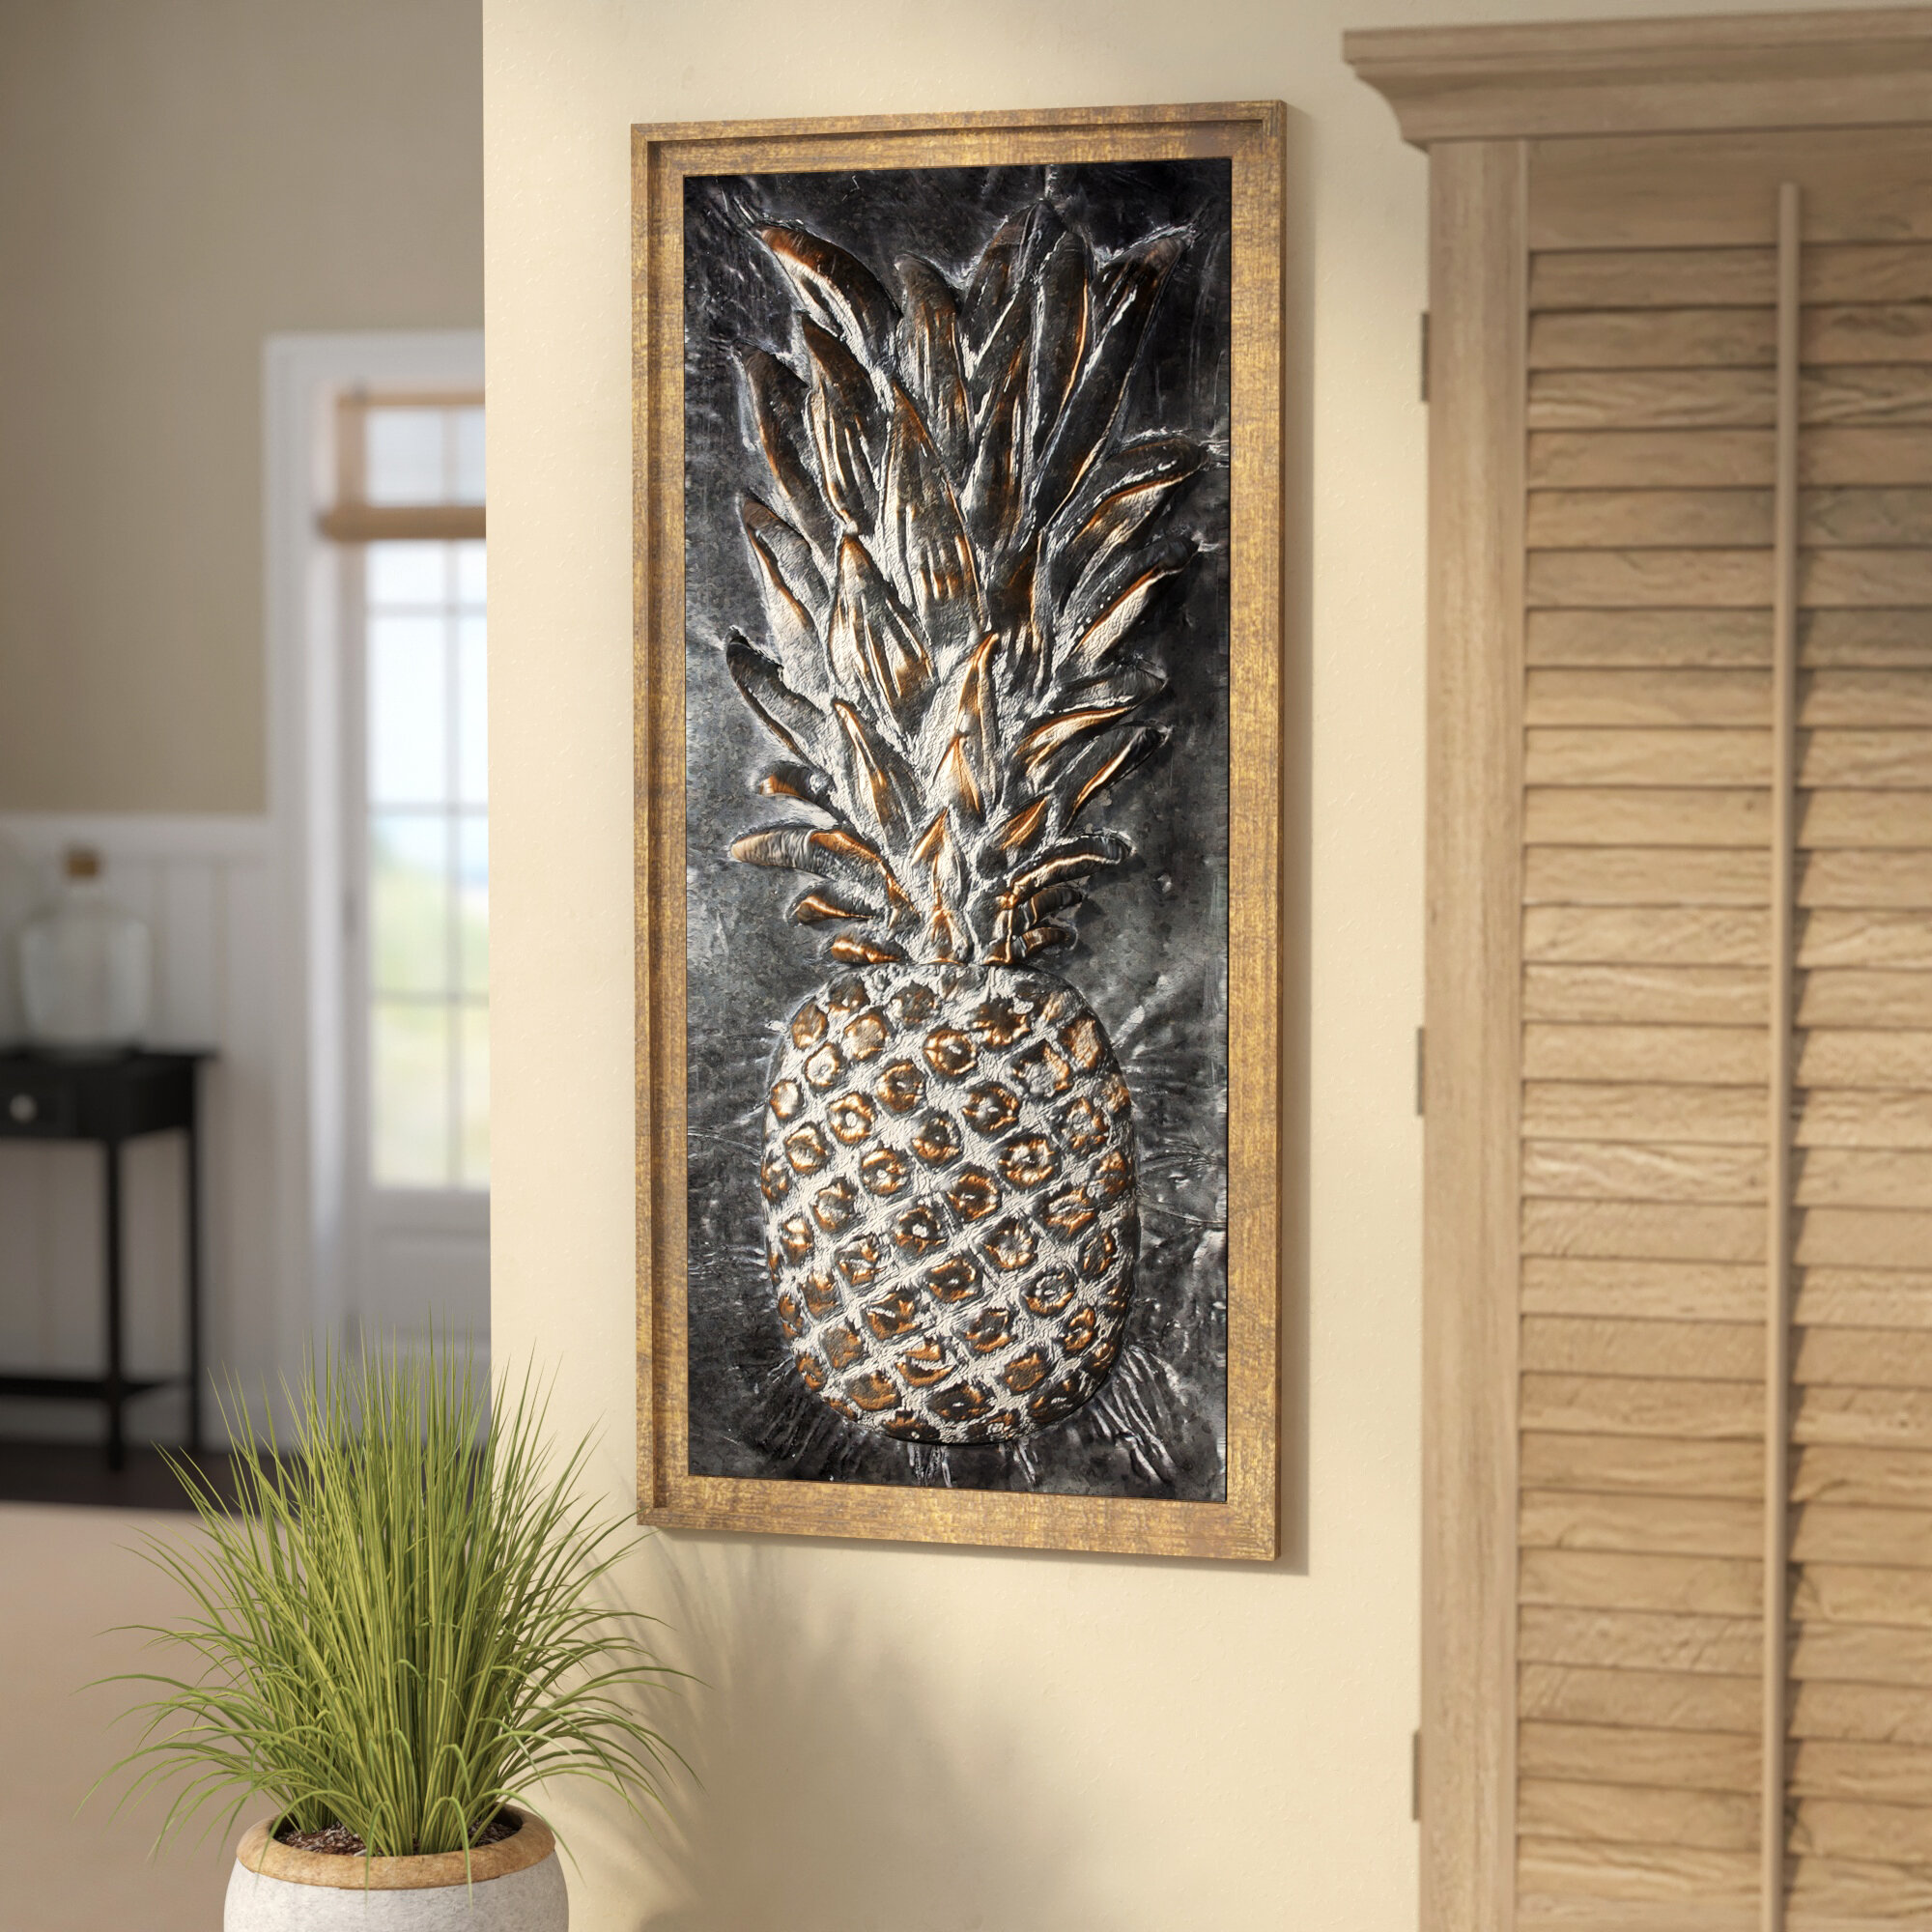 Bay Isle Home Skid Be a Pineapple Wall Décor 